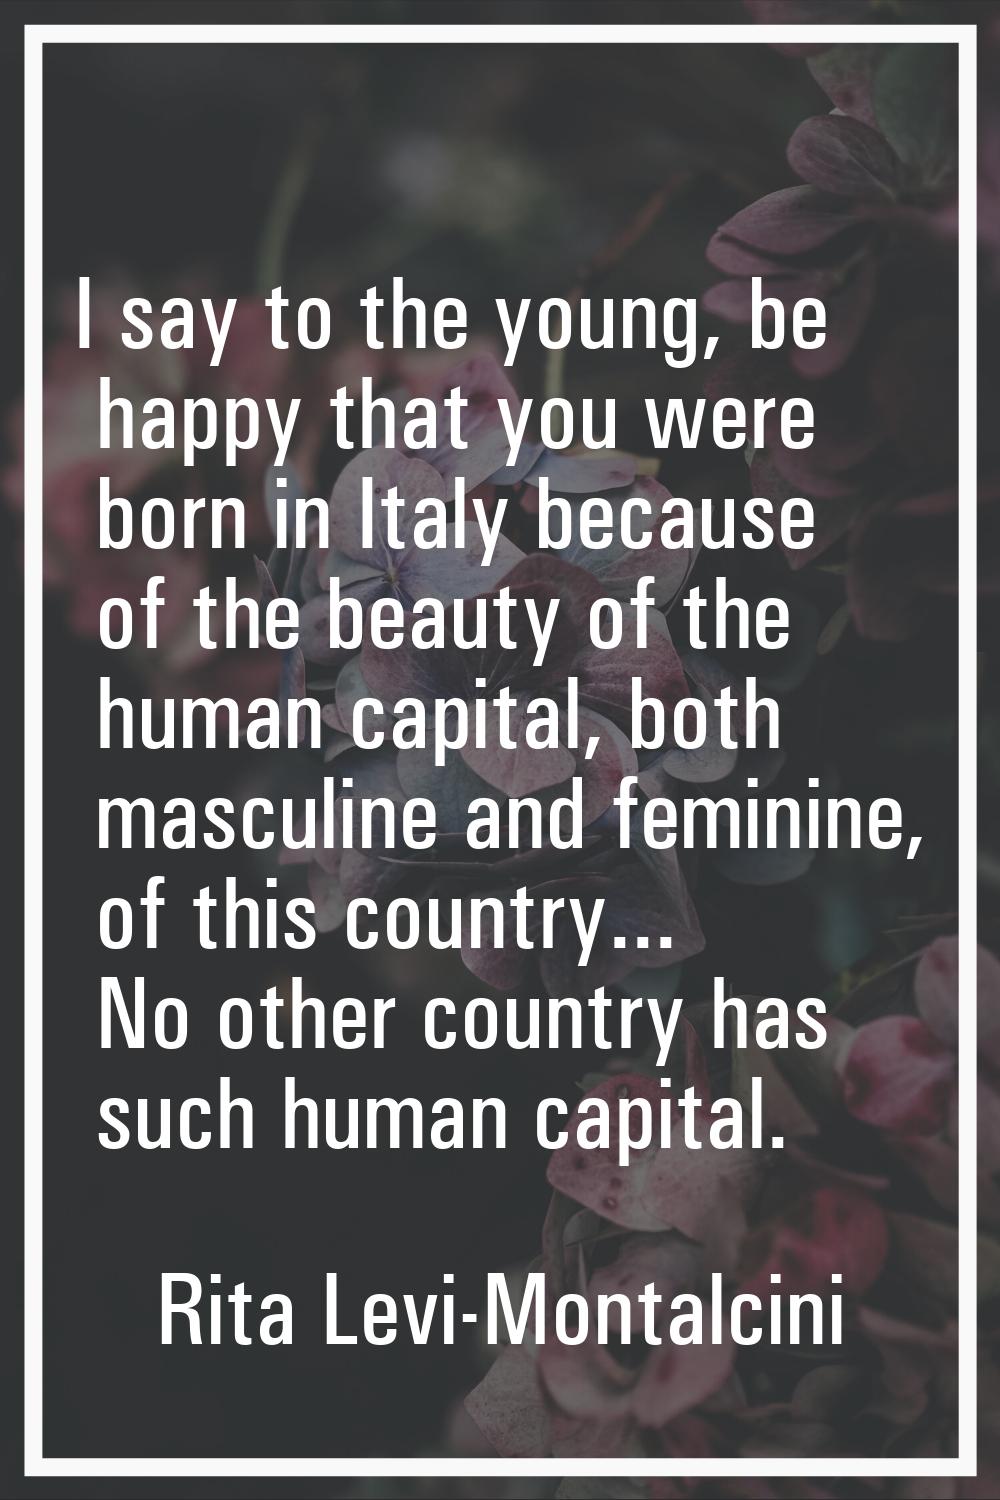 I say to the young, be happy that you were born in Italy because of the beauty of the human capital